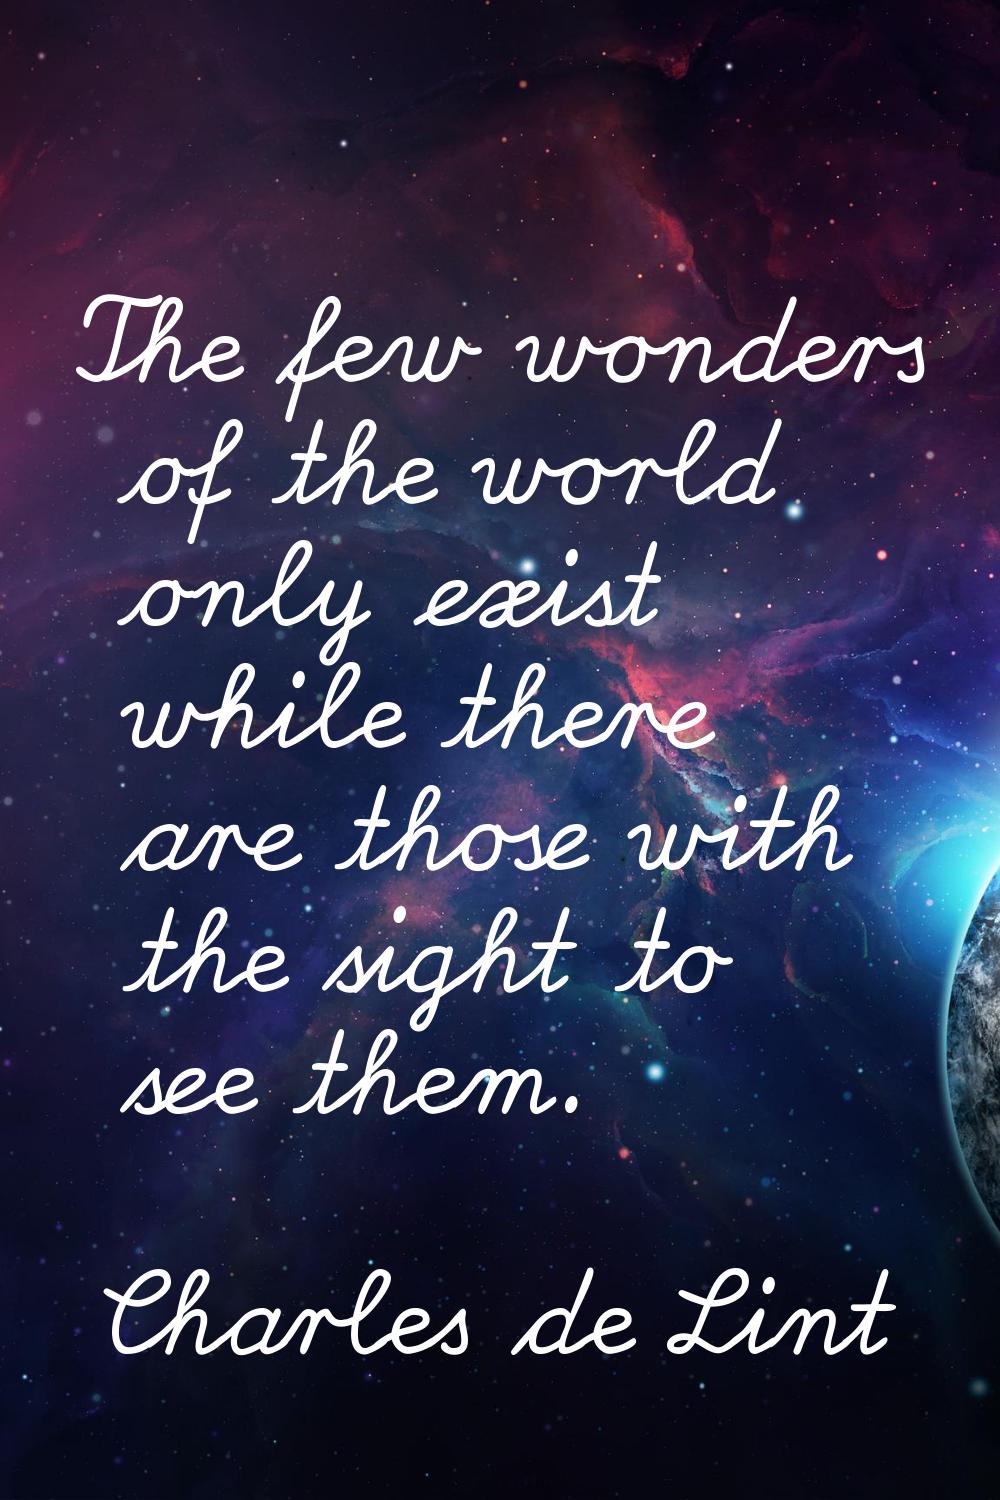 The few wonders of the world only exist while there are those with the sight to see them.